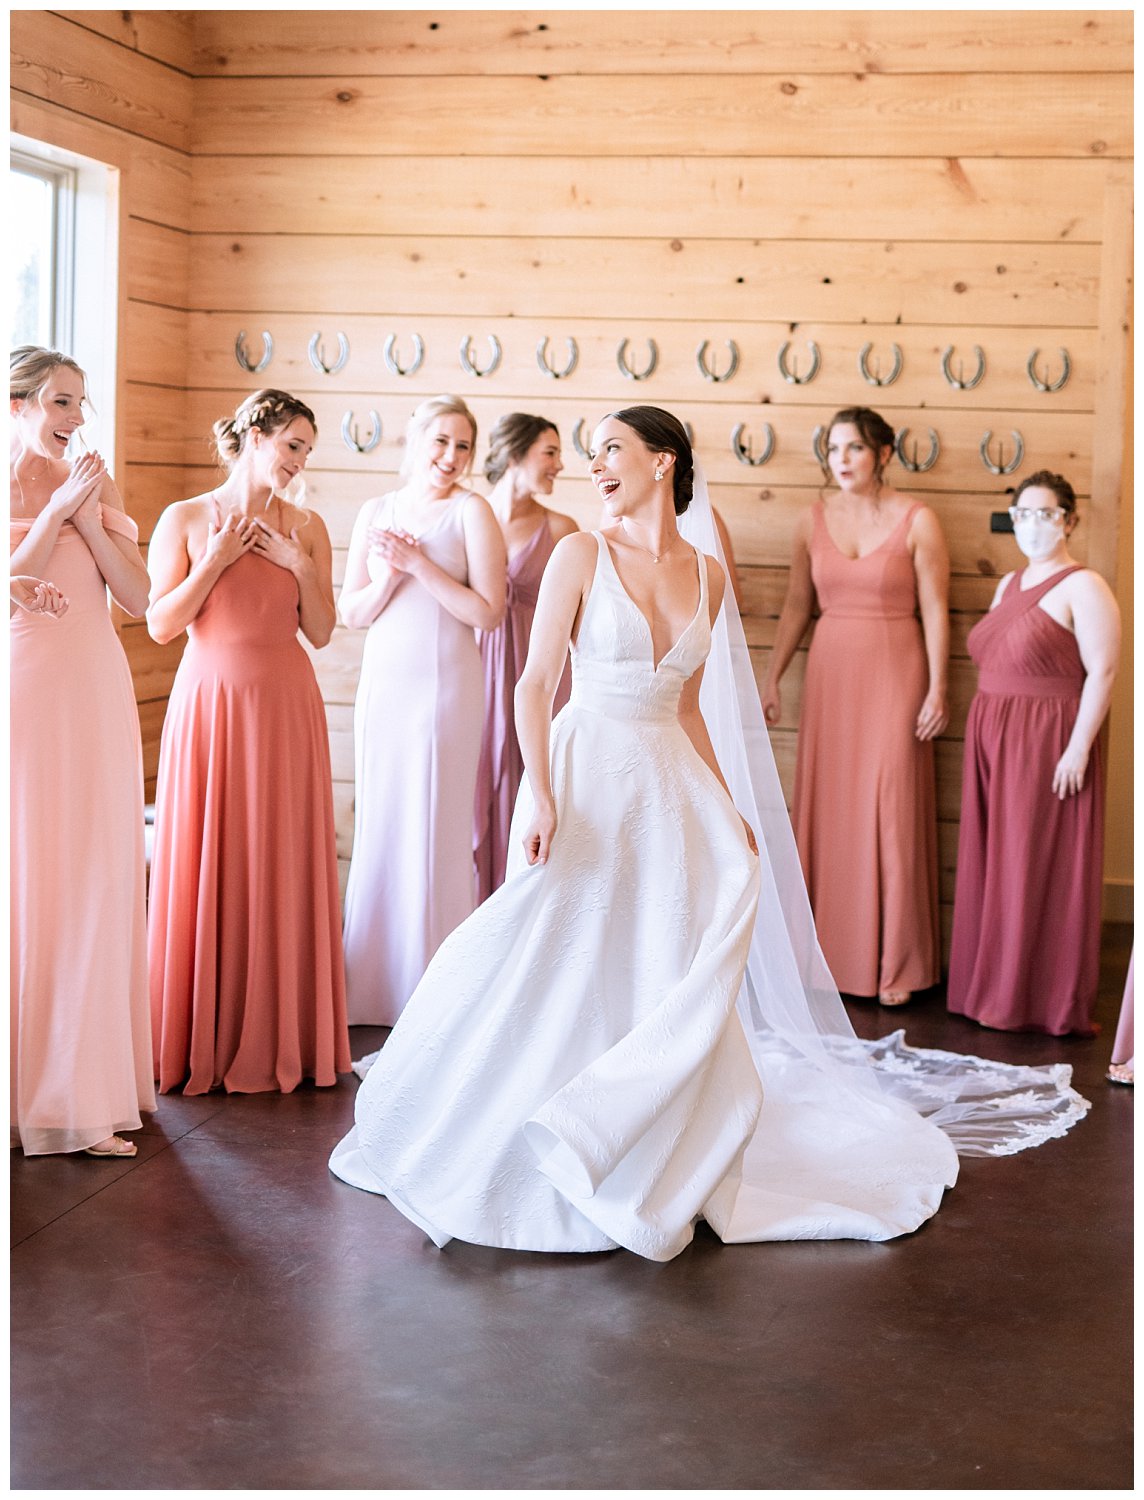 Bride reveal with bridesmaids in mismatching pink dresses